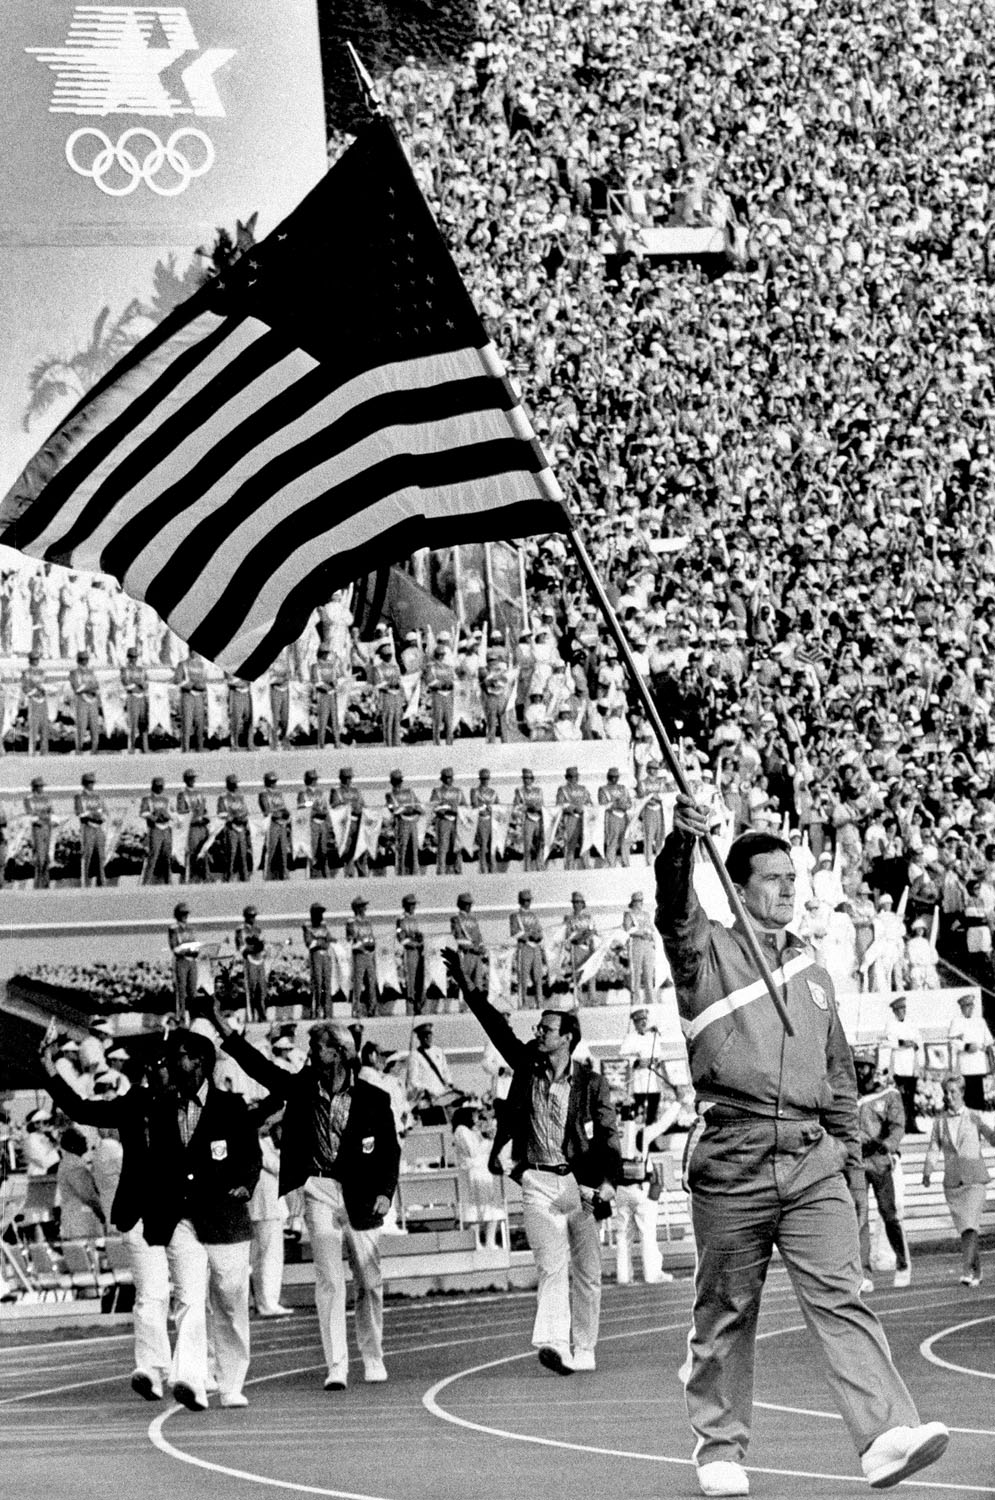 Ed Burke, a hammer thrower, bears the flag of the United States, as the team marches into the Coliseum, during the opening ceremonies of the 23rd Summer Olympics in Los Angeles, July 28, 1984.